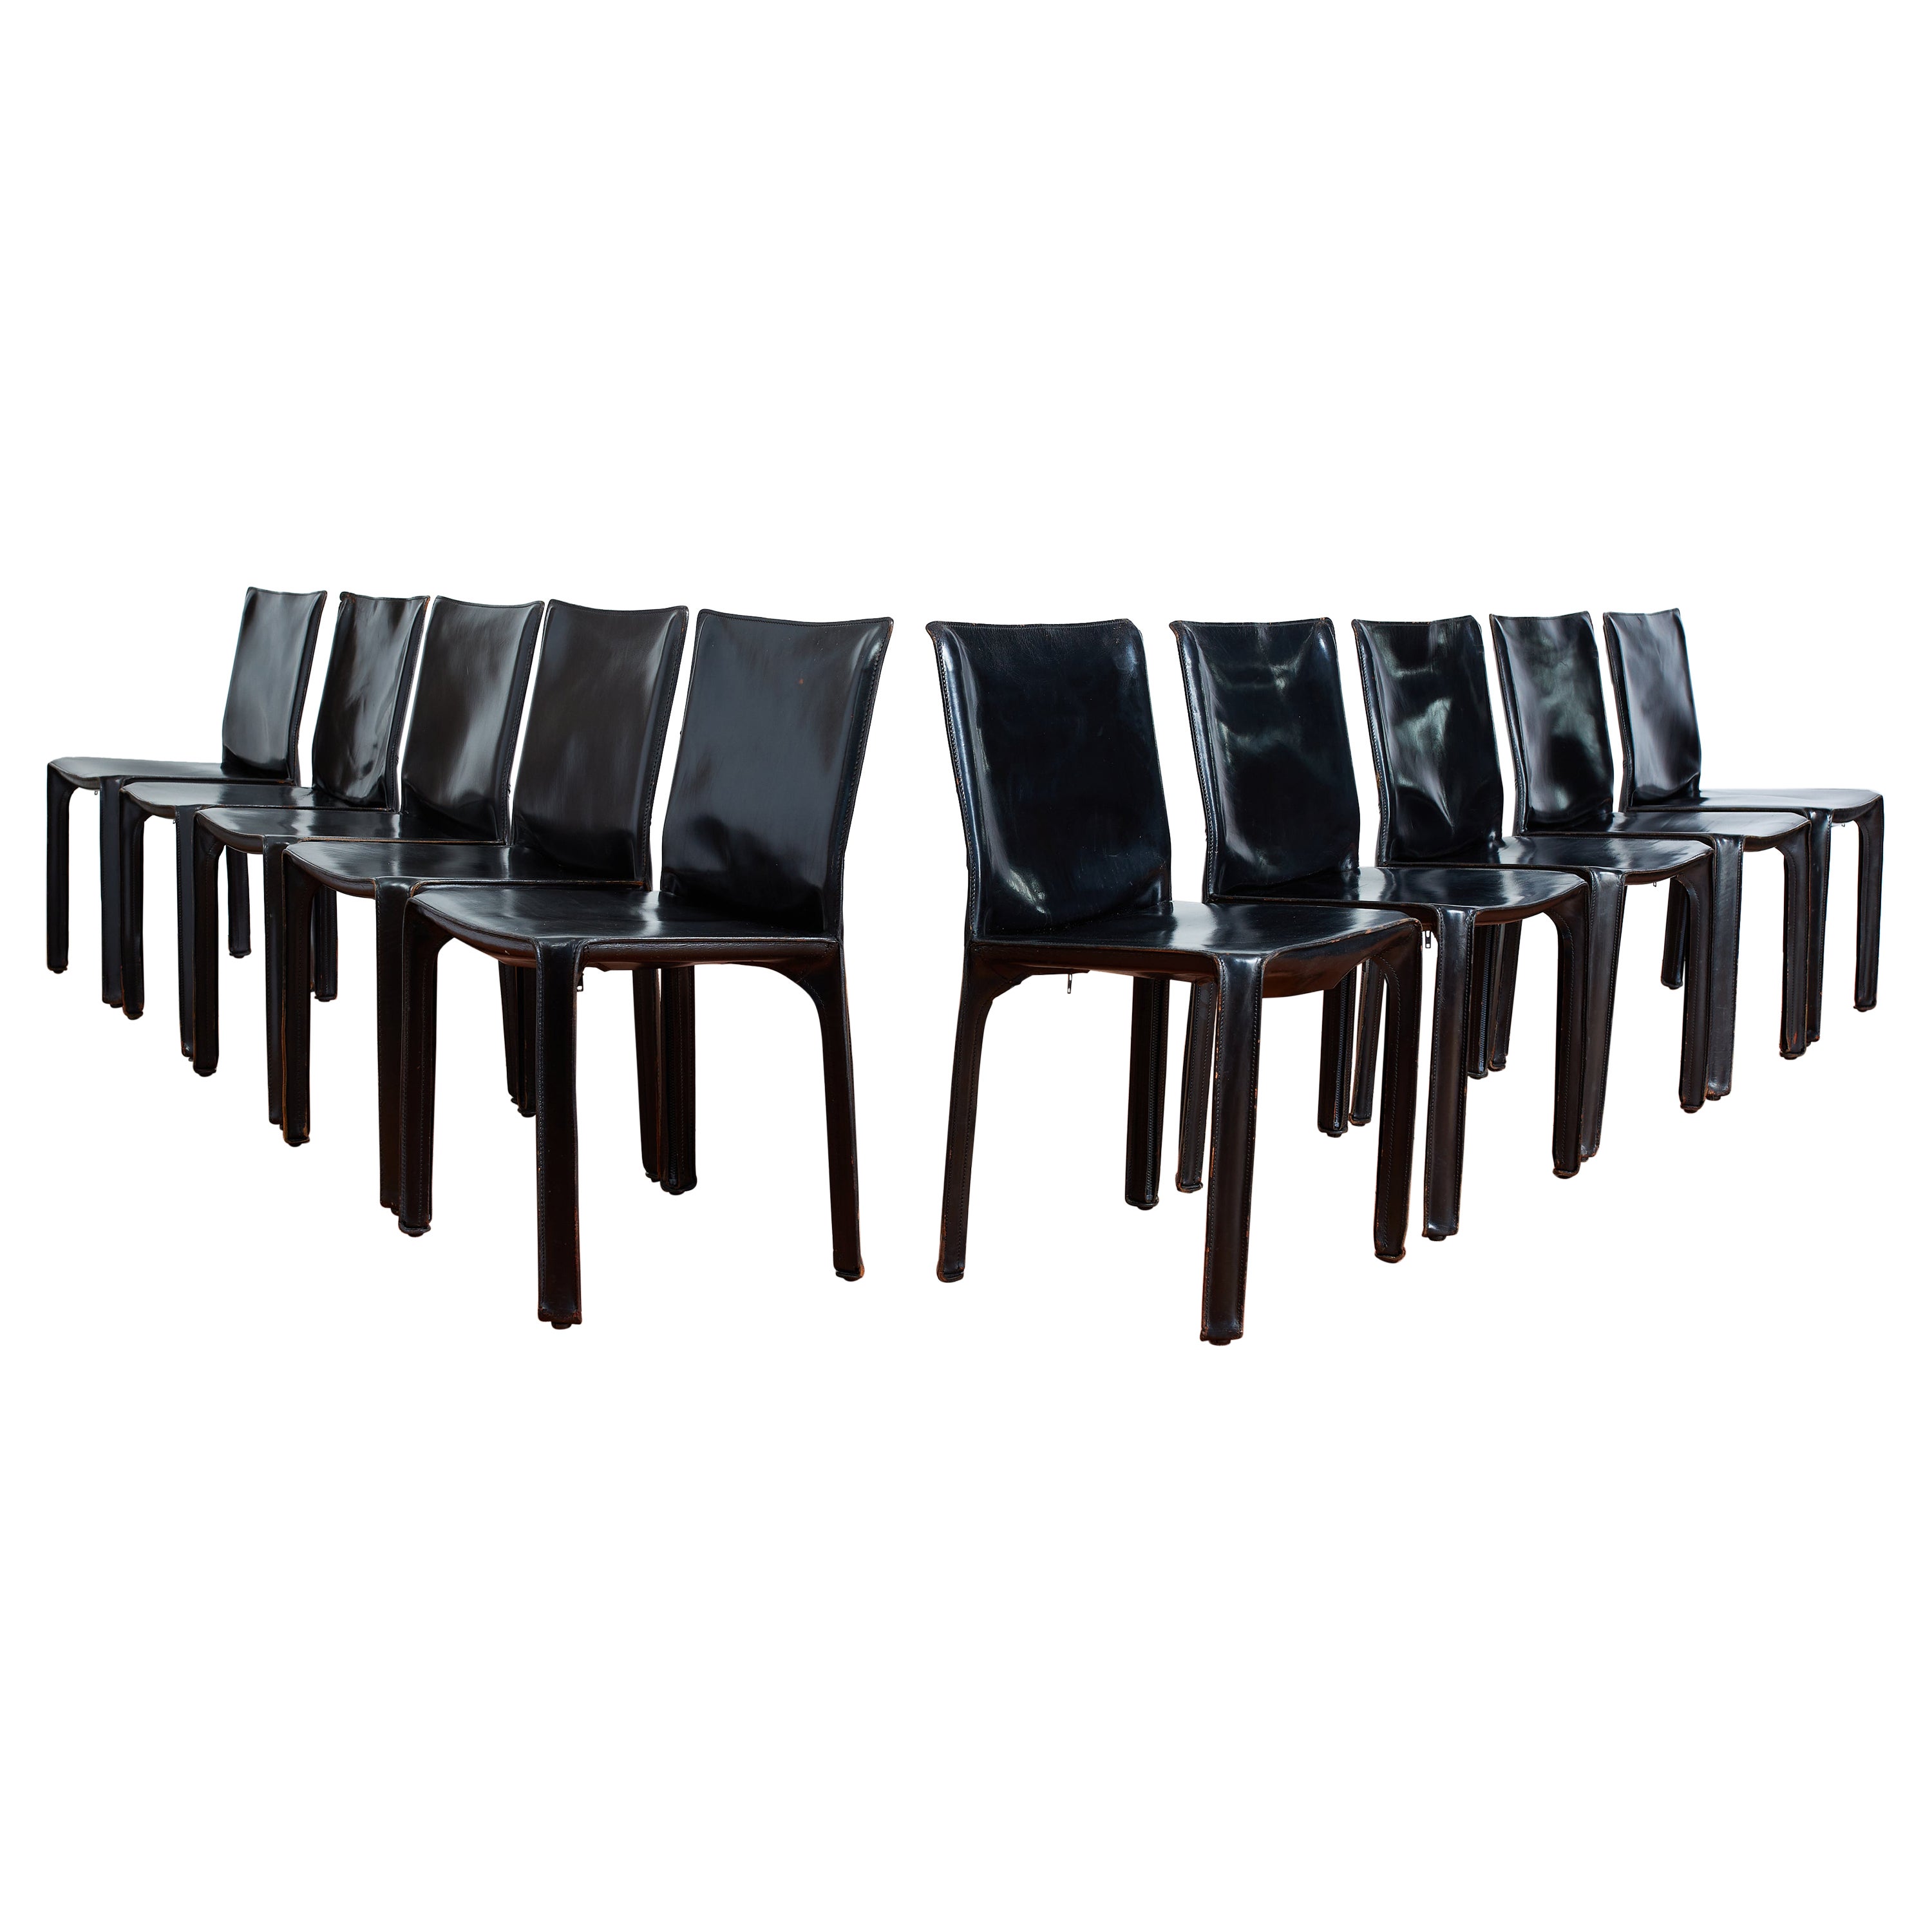 Mario Bellini "Cab" Chairs For Sale